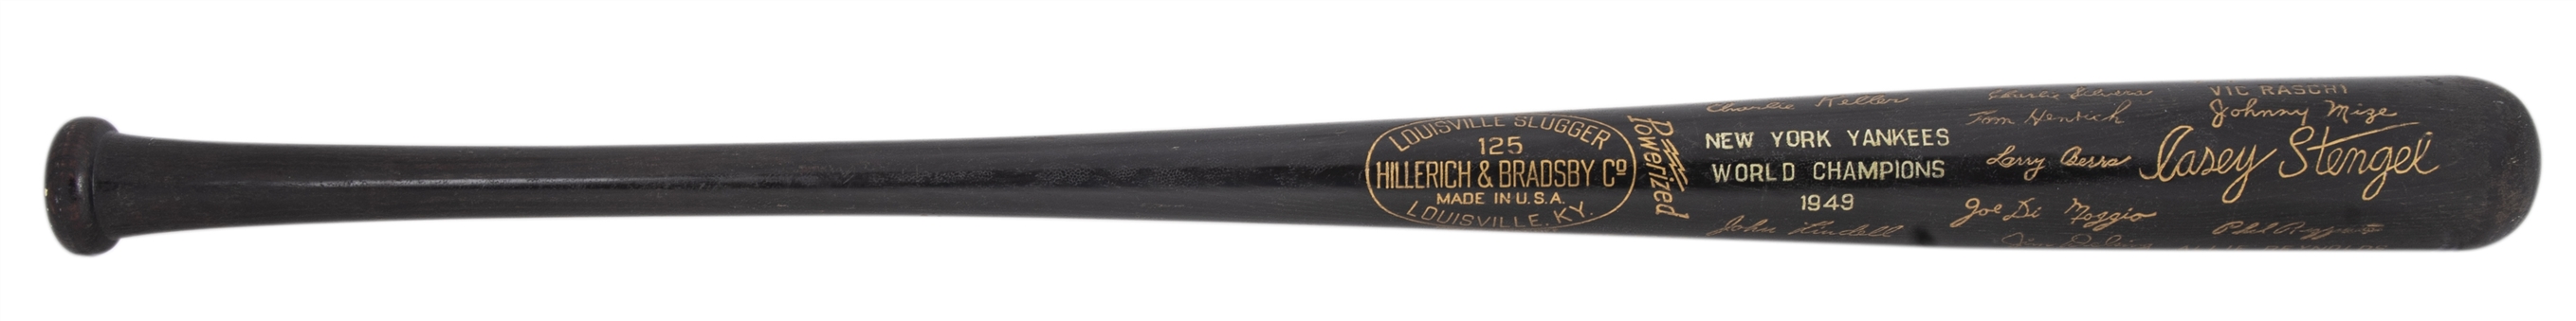 Casey Stengel Personally Owned 1949 New York Yankees World Series Champions Trophy Bat (Family LOA)